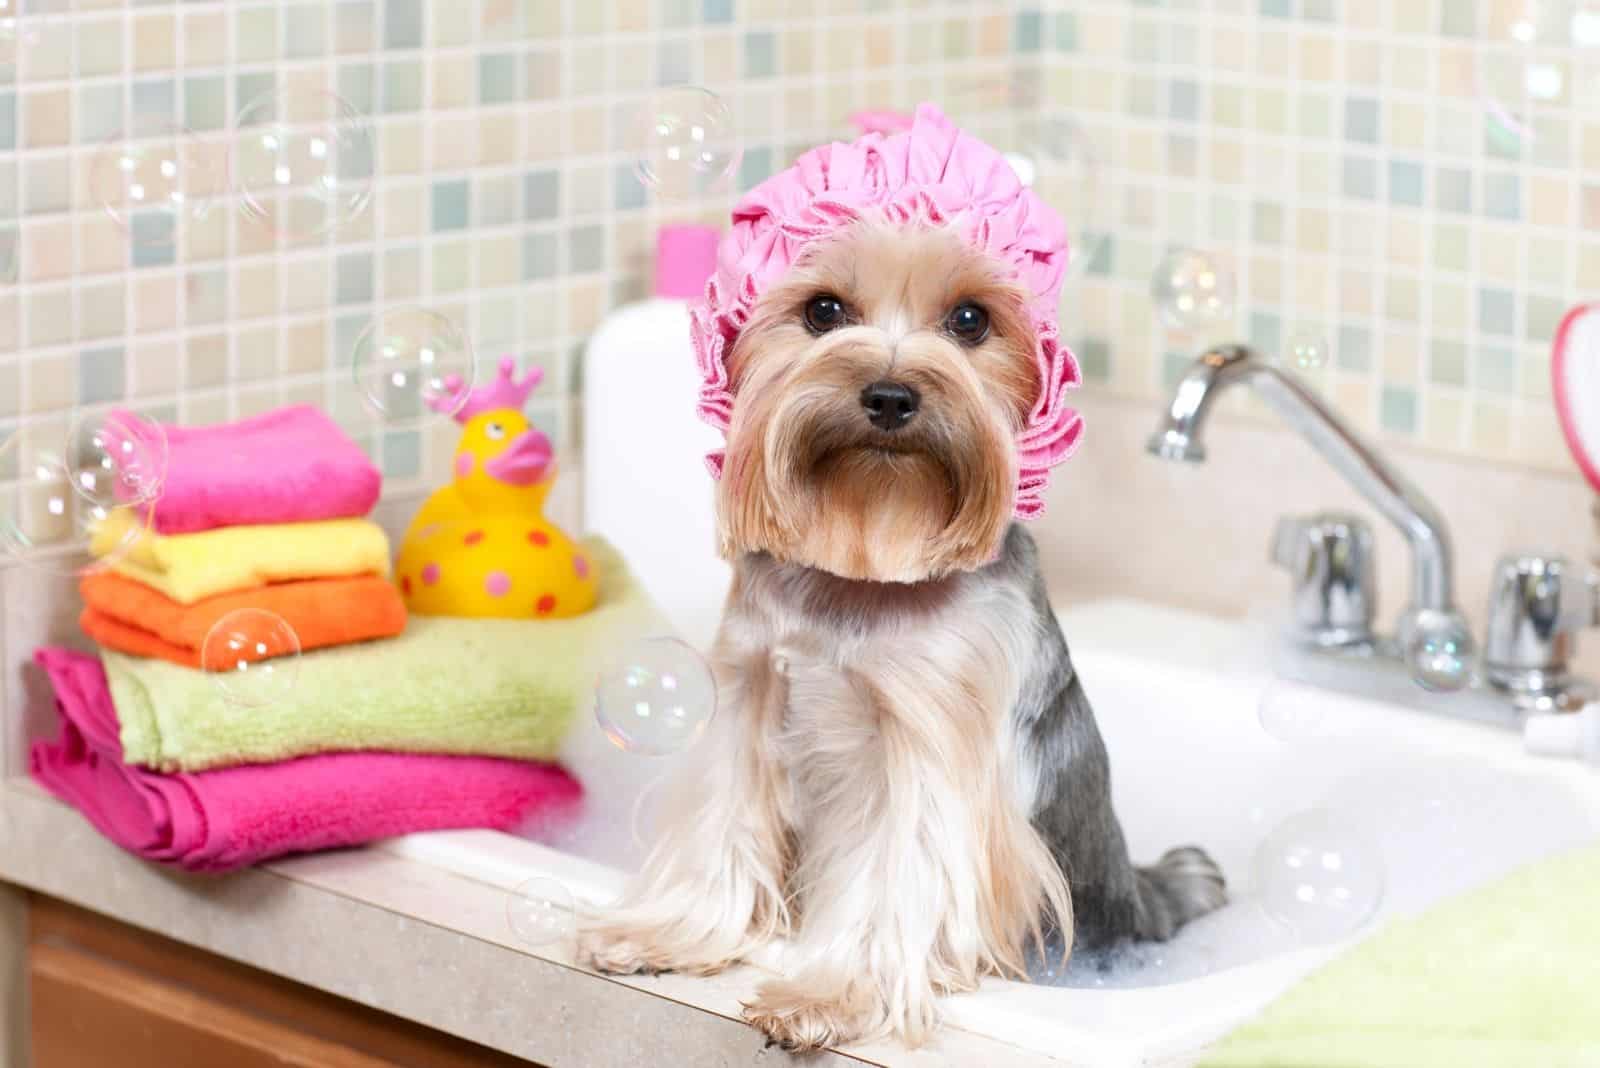 yorkshire terrier enjoying a clean bath at the tub with pink head cap